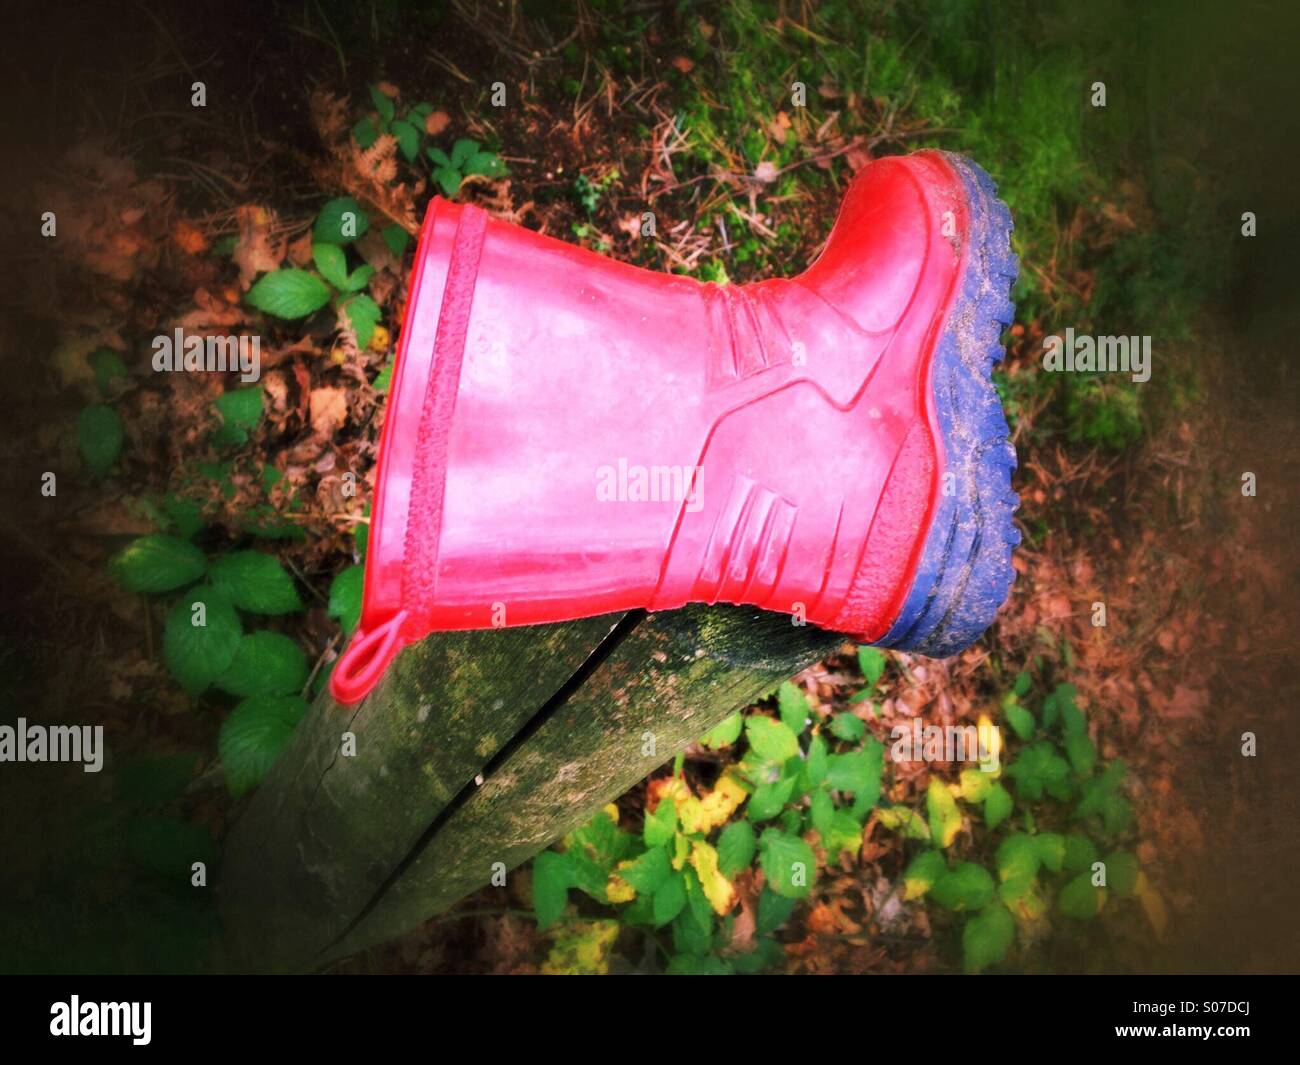 A child's lost red Wellington boot on a post Stock Photo